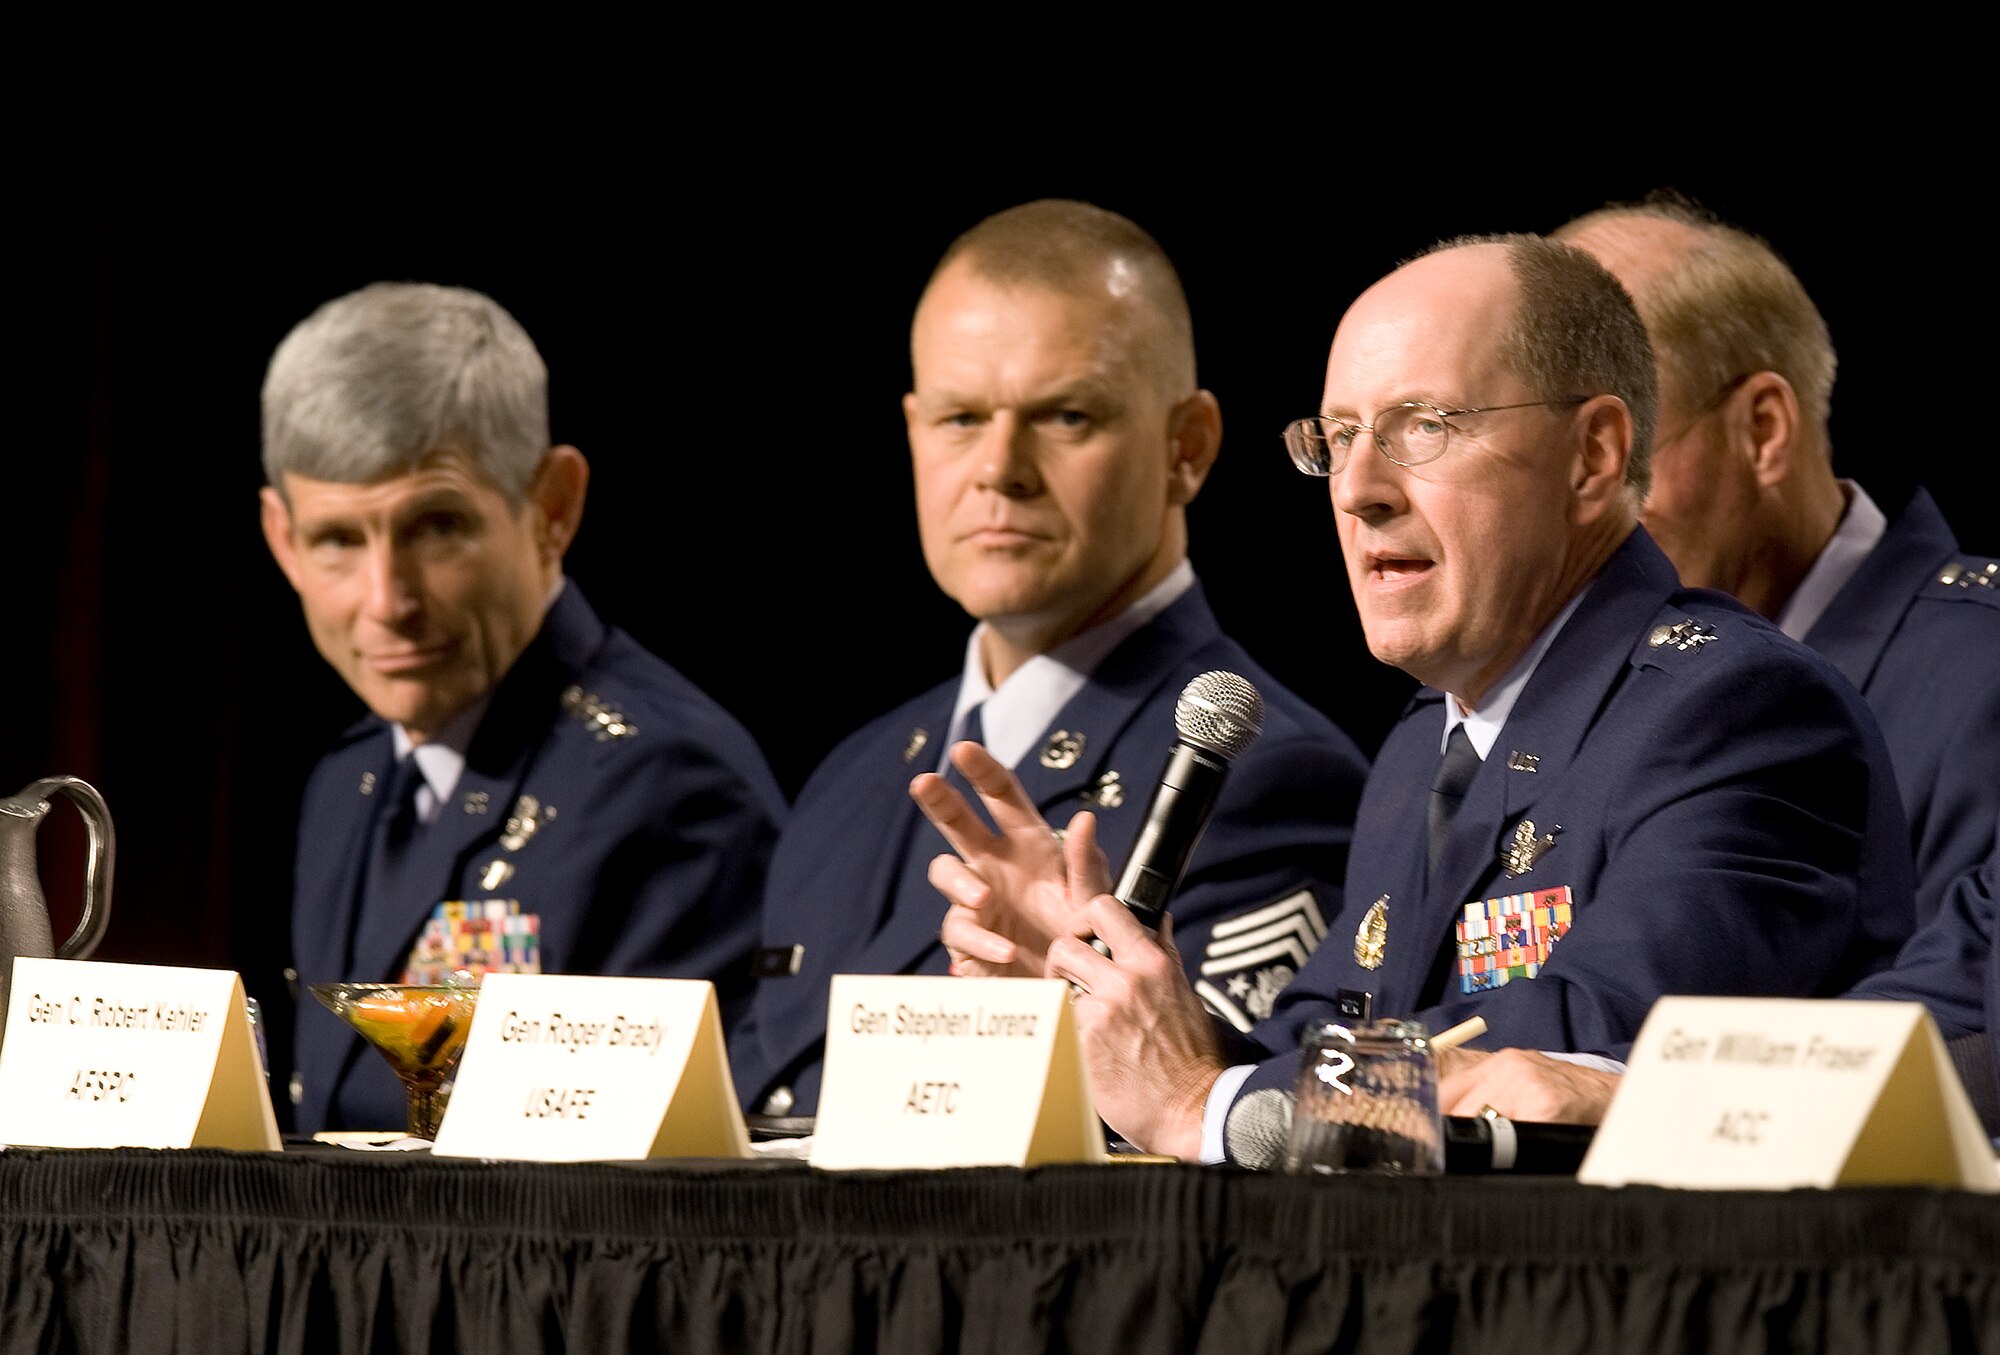 Gen. C. Robert Kehler answers a question during a four-star forum Sept. 15, 2010, at the Air Force Association 2010 Air and Space Conference and Technology Exposition at National Harbor in Oxon Hill, Md. Led by Air Force Chief of Staff Gen. Norton Schwartz, the forum provided a chance for conference attendees to pose questions directly to Air Force senior leaders. General Kehler is the Air Force Space Command commander. (U.S. Air Force photo/Jim Varhegyi)